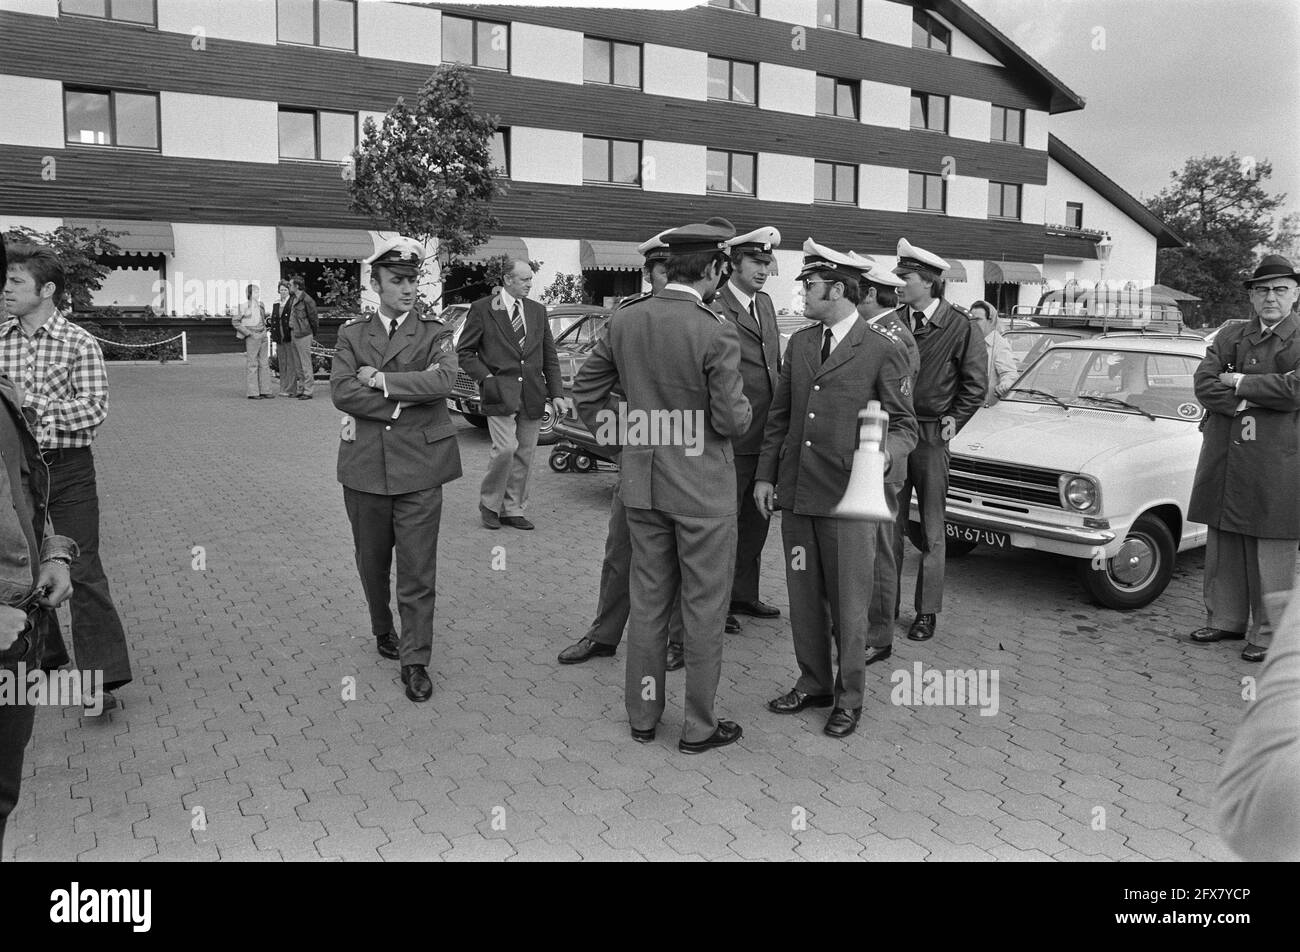 Arrival Dutch national team in Hiltrup ( West Germany ) World Cup 1974; guard at hotel, June 12, 1974, guards, national teams, hotels, sports, soccer, The Netherlands, 20th century press agency photo, news to remember, documentary, historic photography 1945-1990, visual stories, human history of the Twentieth Century, capturing moments in time Stock Photo